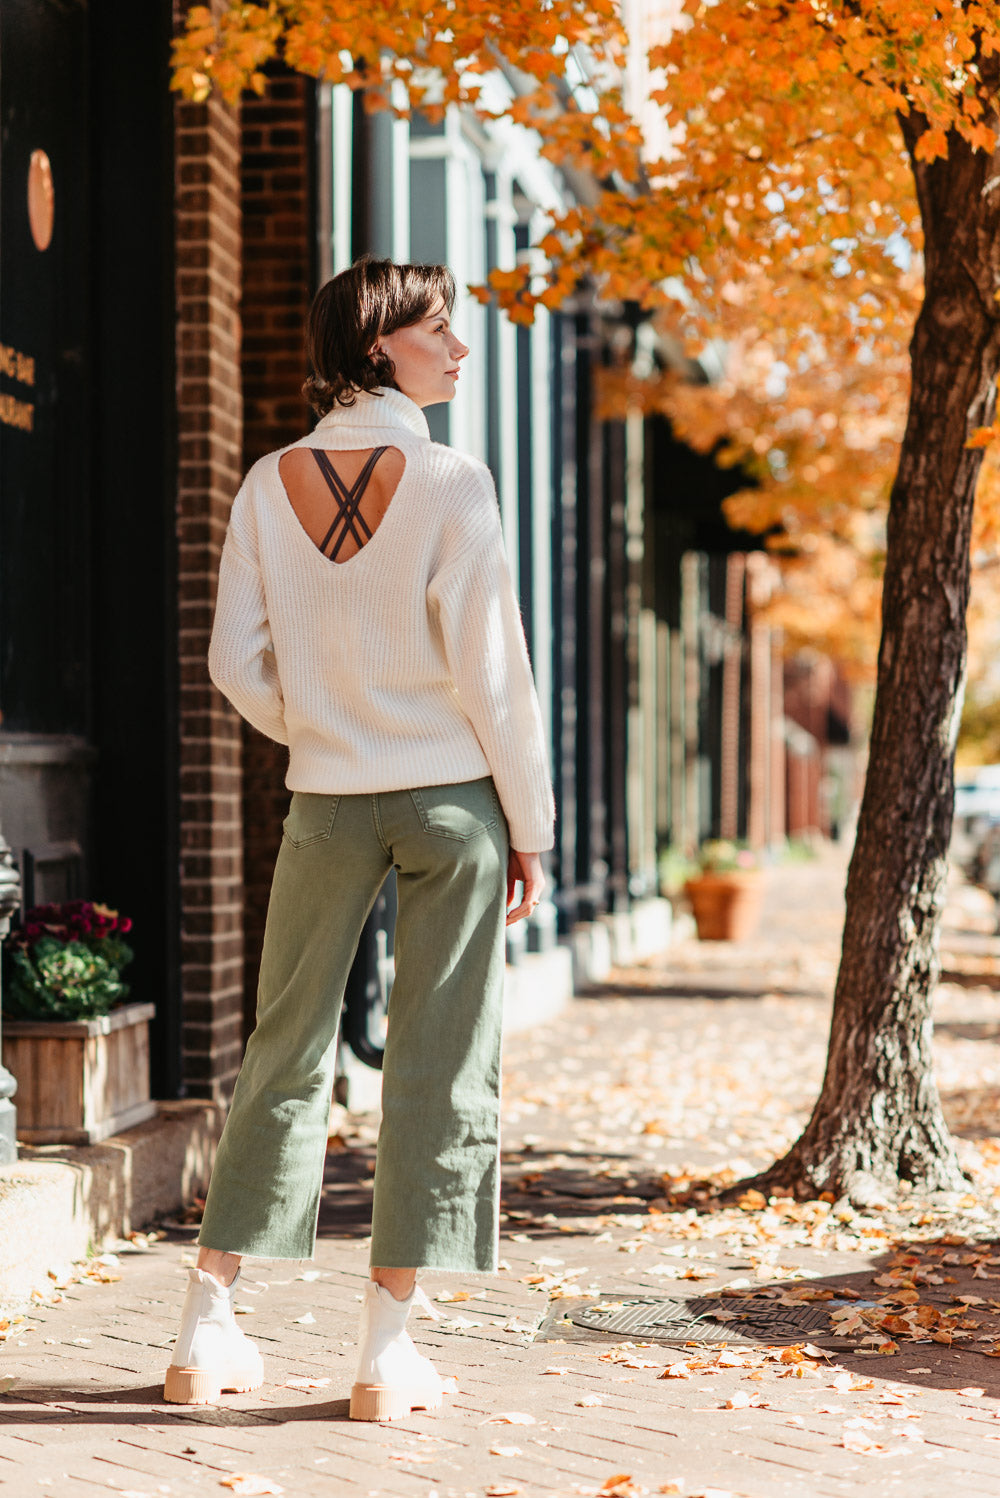 Beige Turtleneck with Tapered Pants Outfits For Women (2 ideas & outfits)